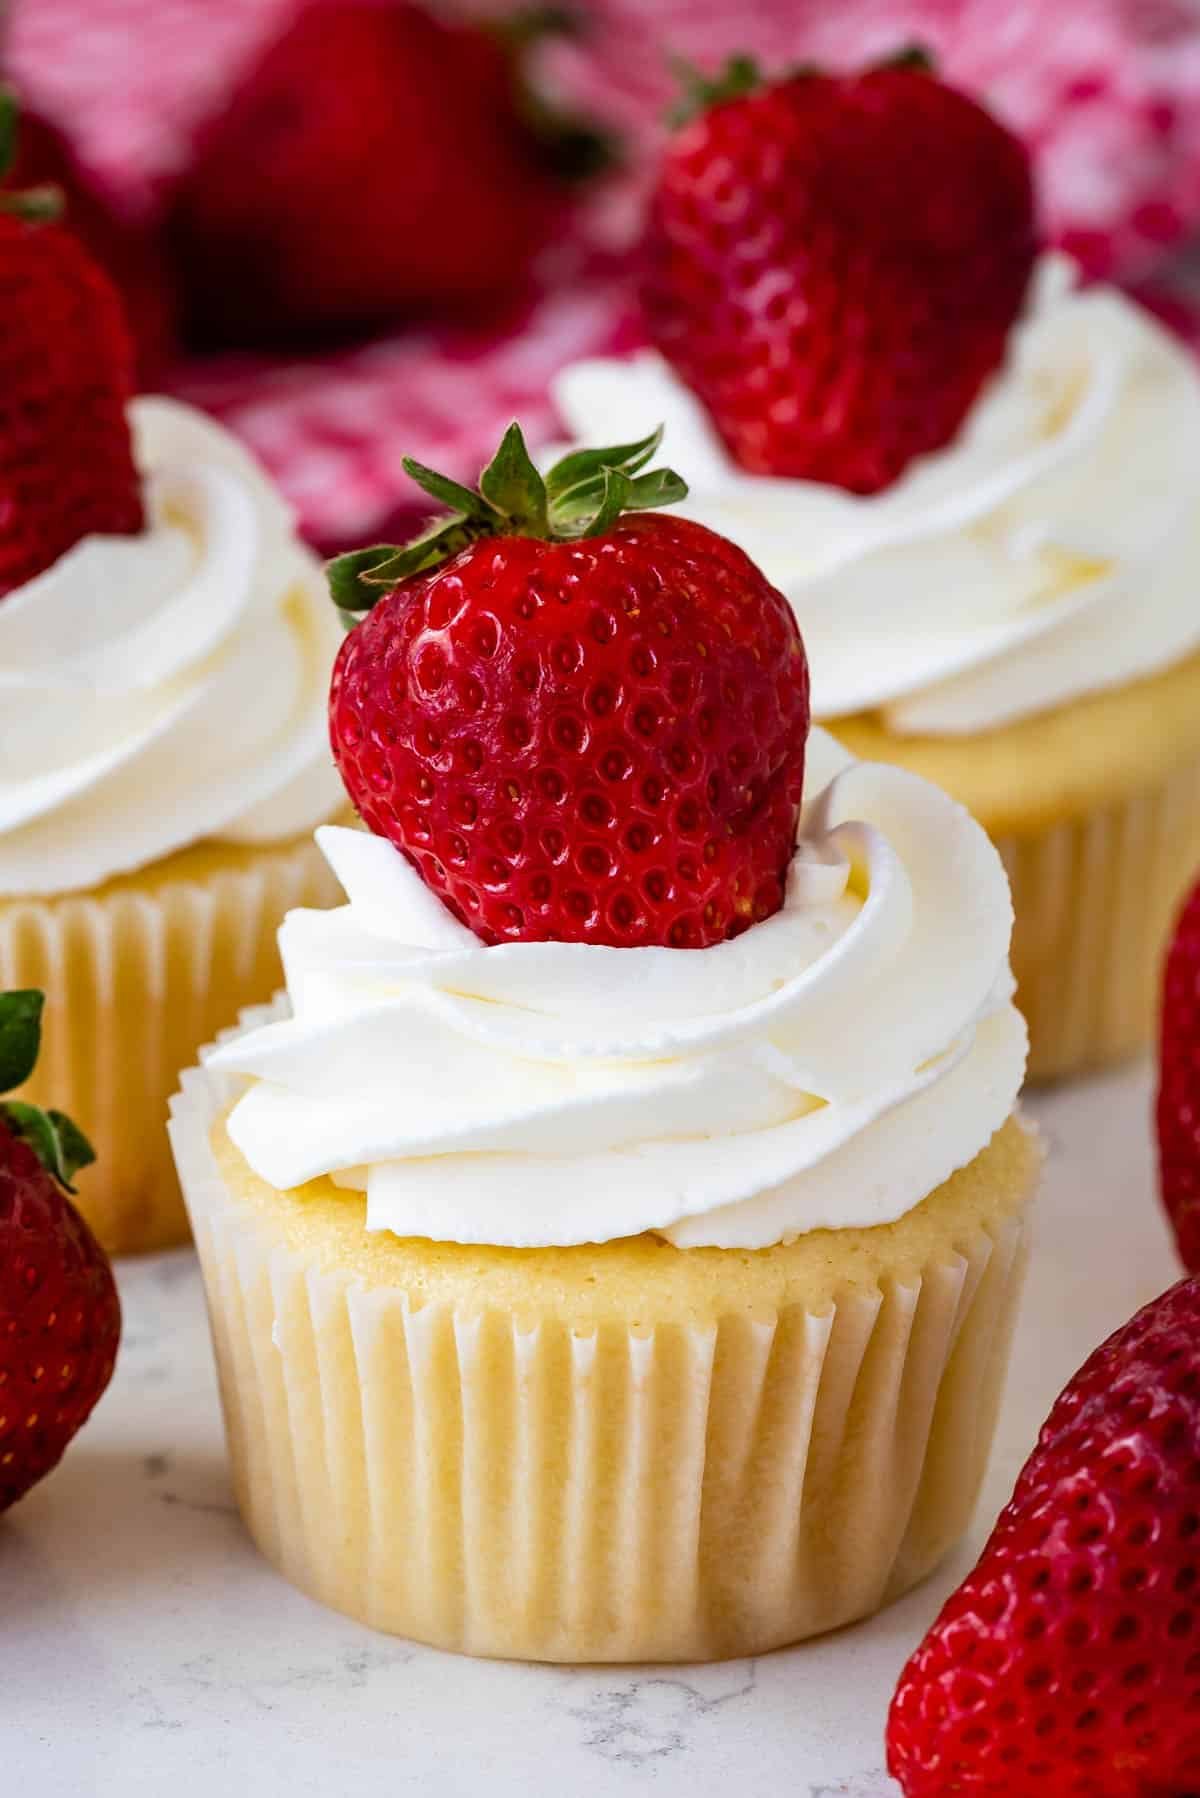 cupcakes with chopped strawberries in the center and topped with white frosting and a strawberry.